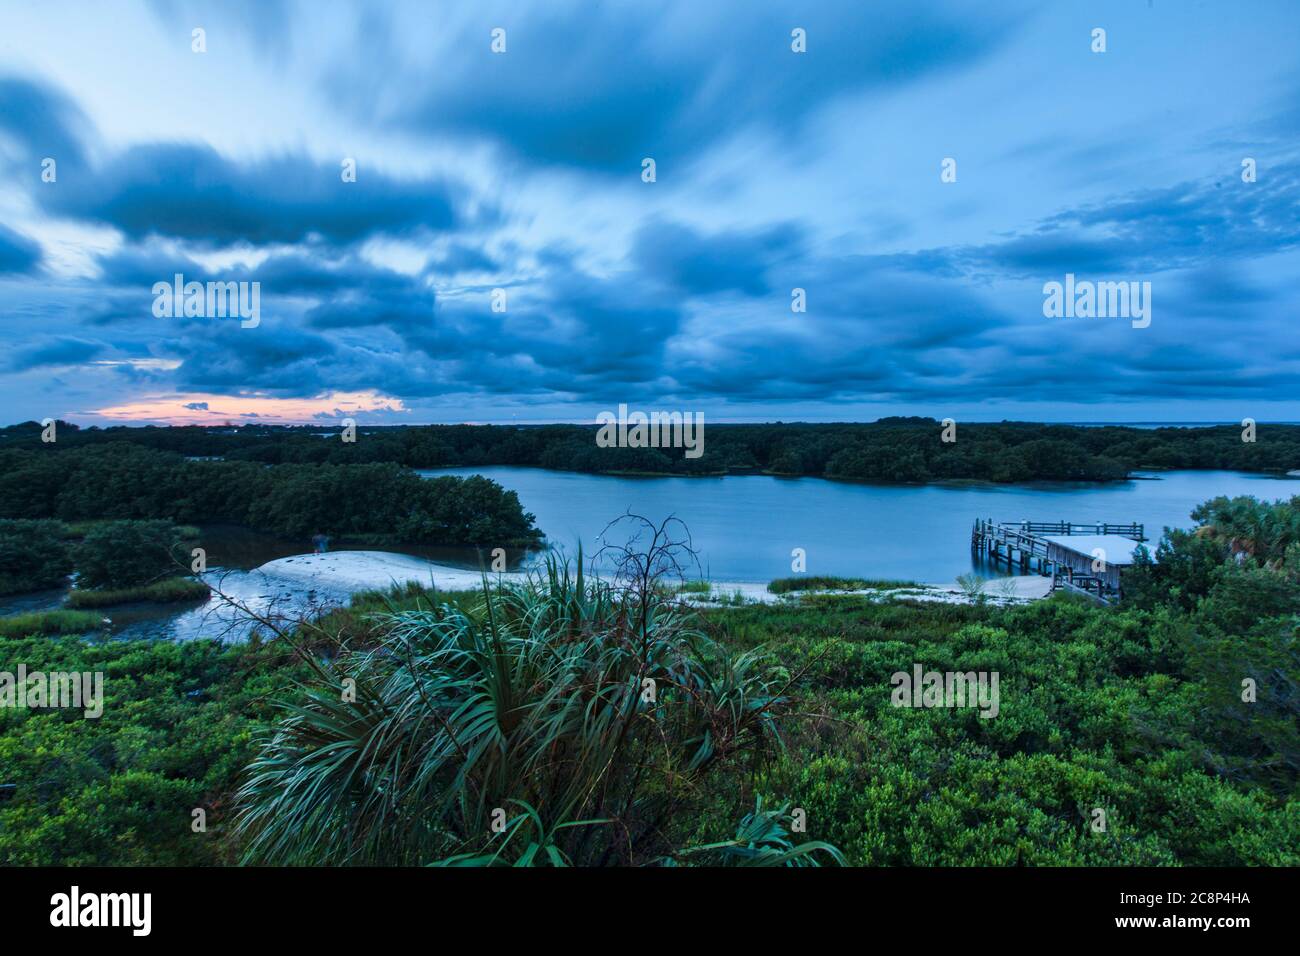 Long exposure  photograph of a elevated view looking over a small inlet in Cedar Key Florida on the Gulf of Mexico Stock Photo